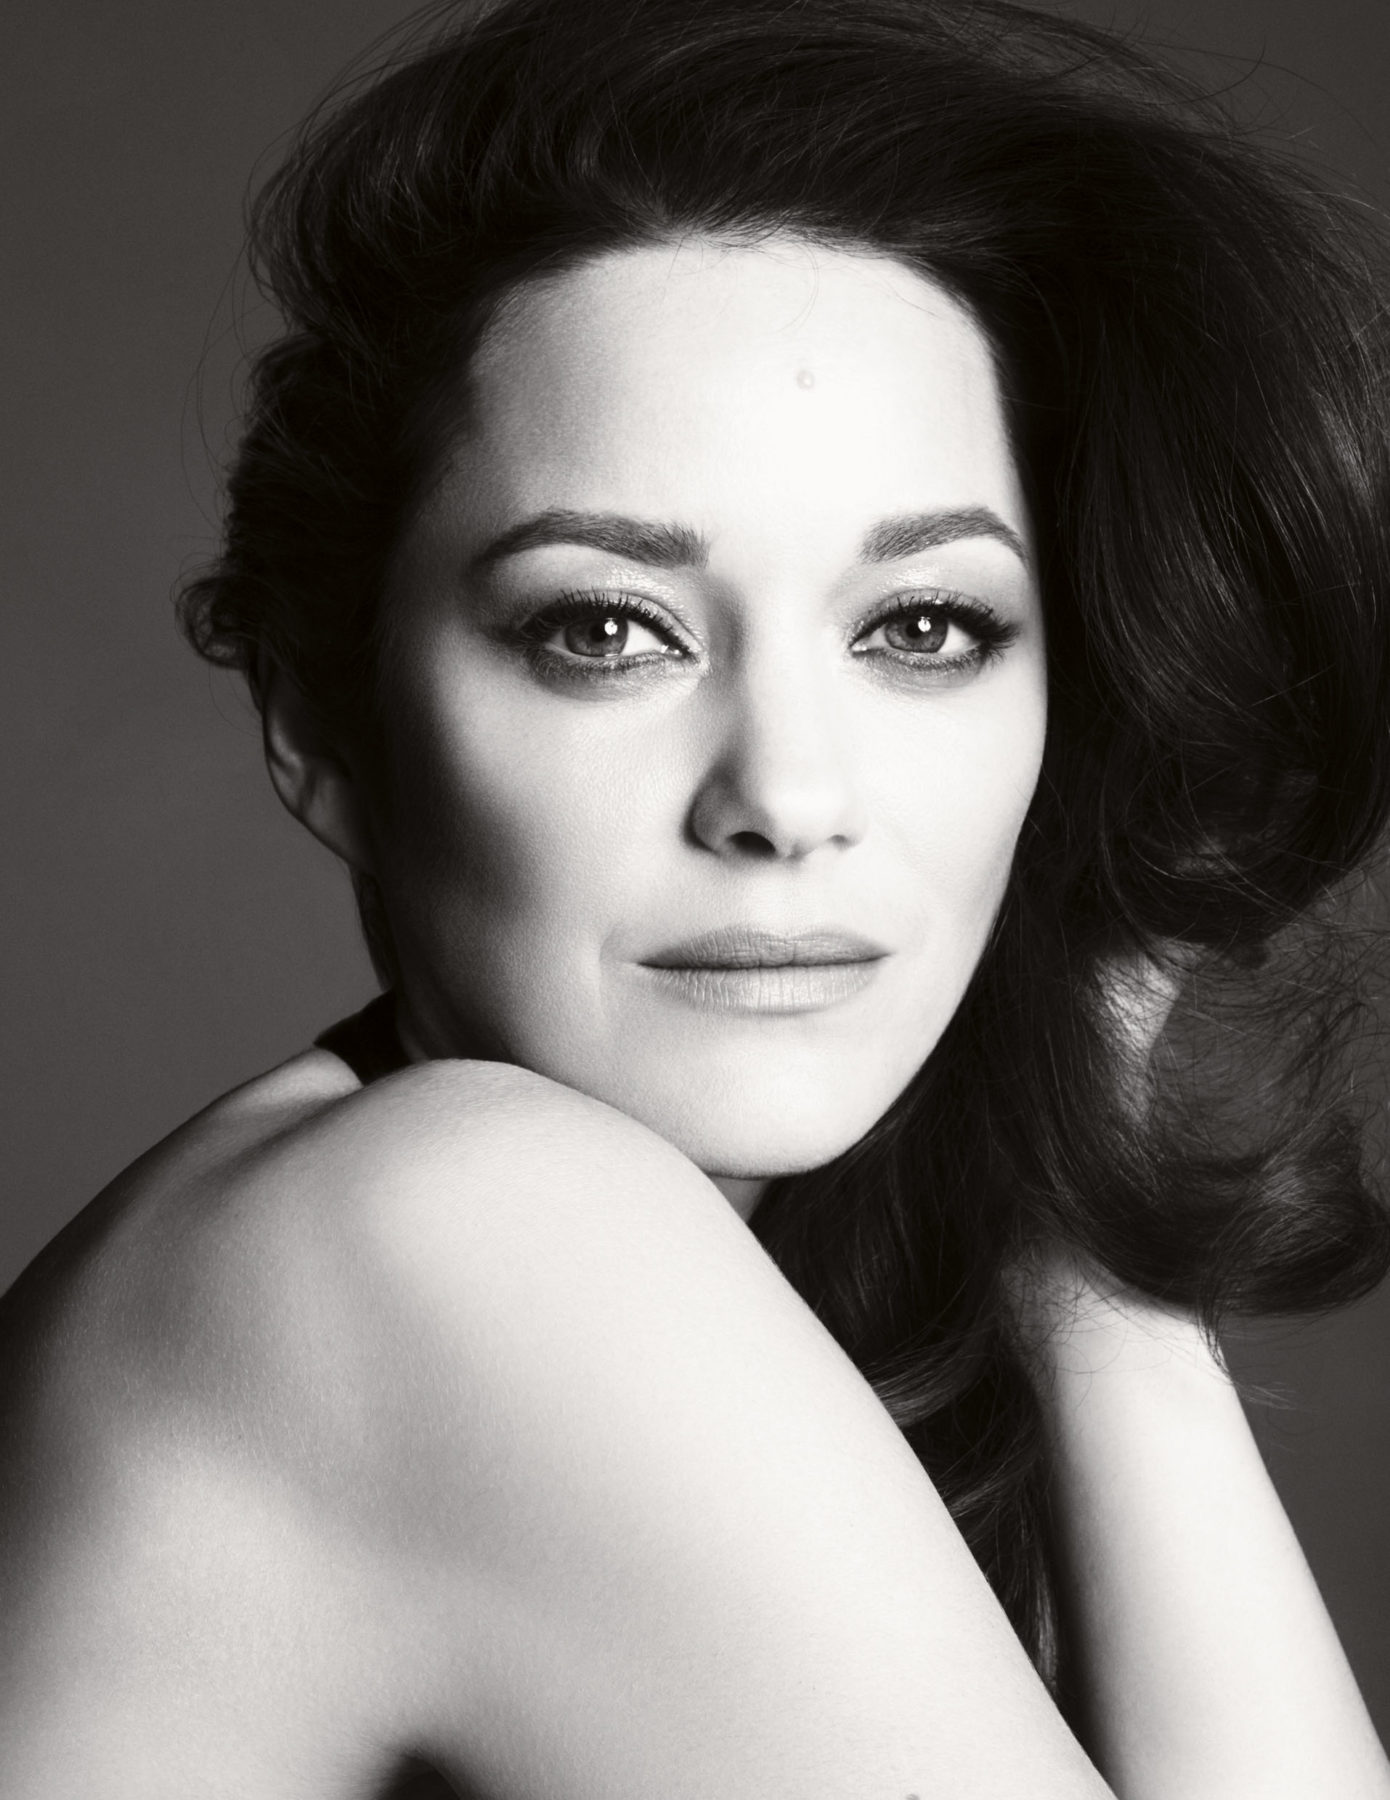 MARION COTILLARD BECOMES THE NEW FACE OF CHANEL N ° 5 - CRAS - EroFound